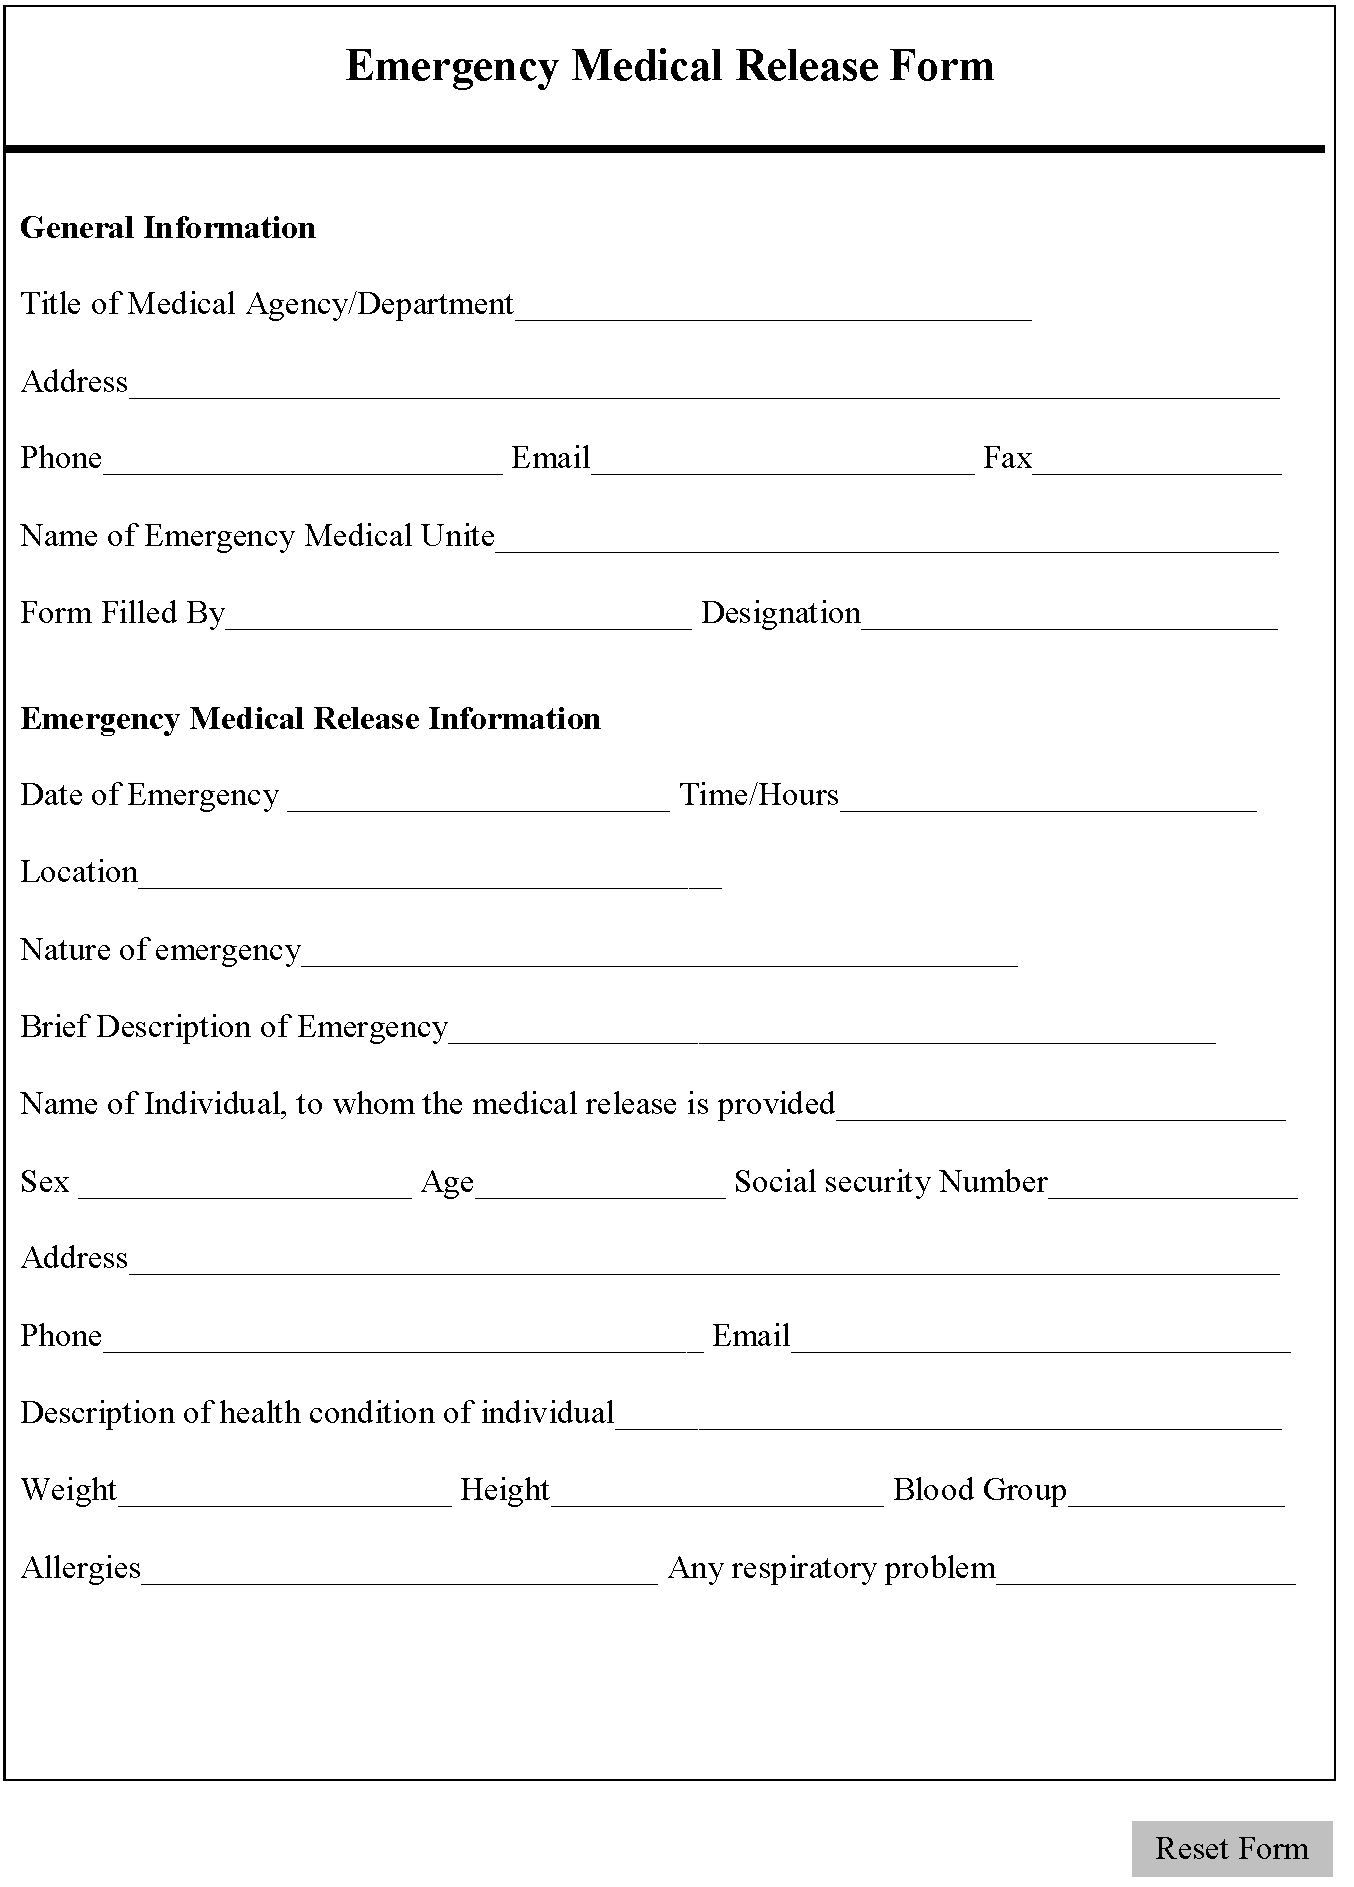 emergency-medical-release-form-editable-pdf-forms